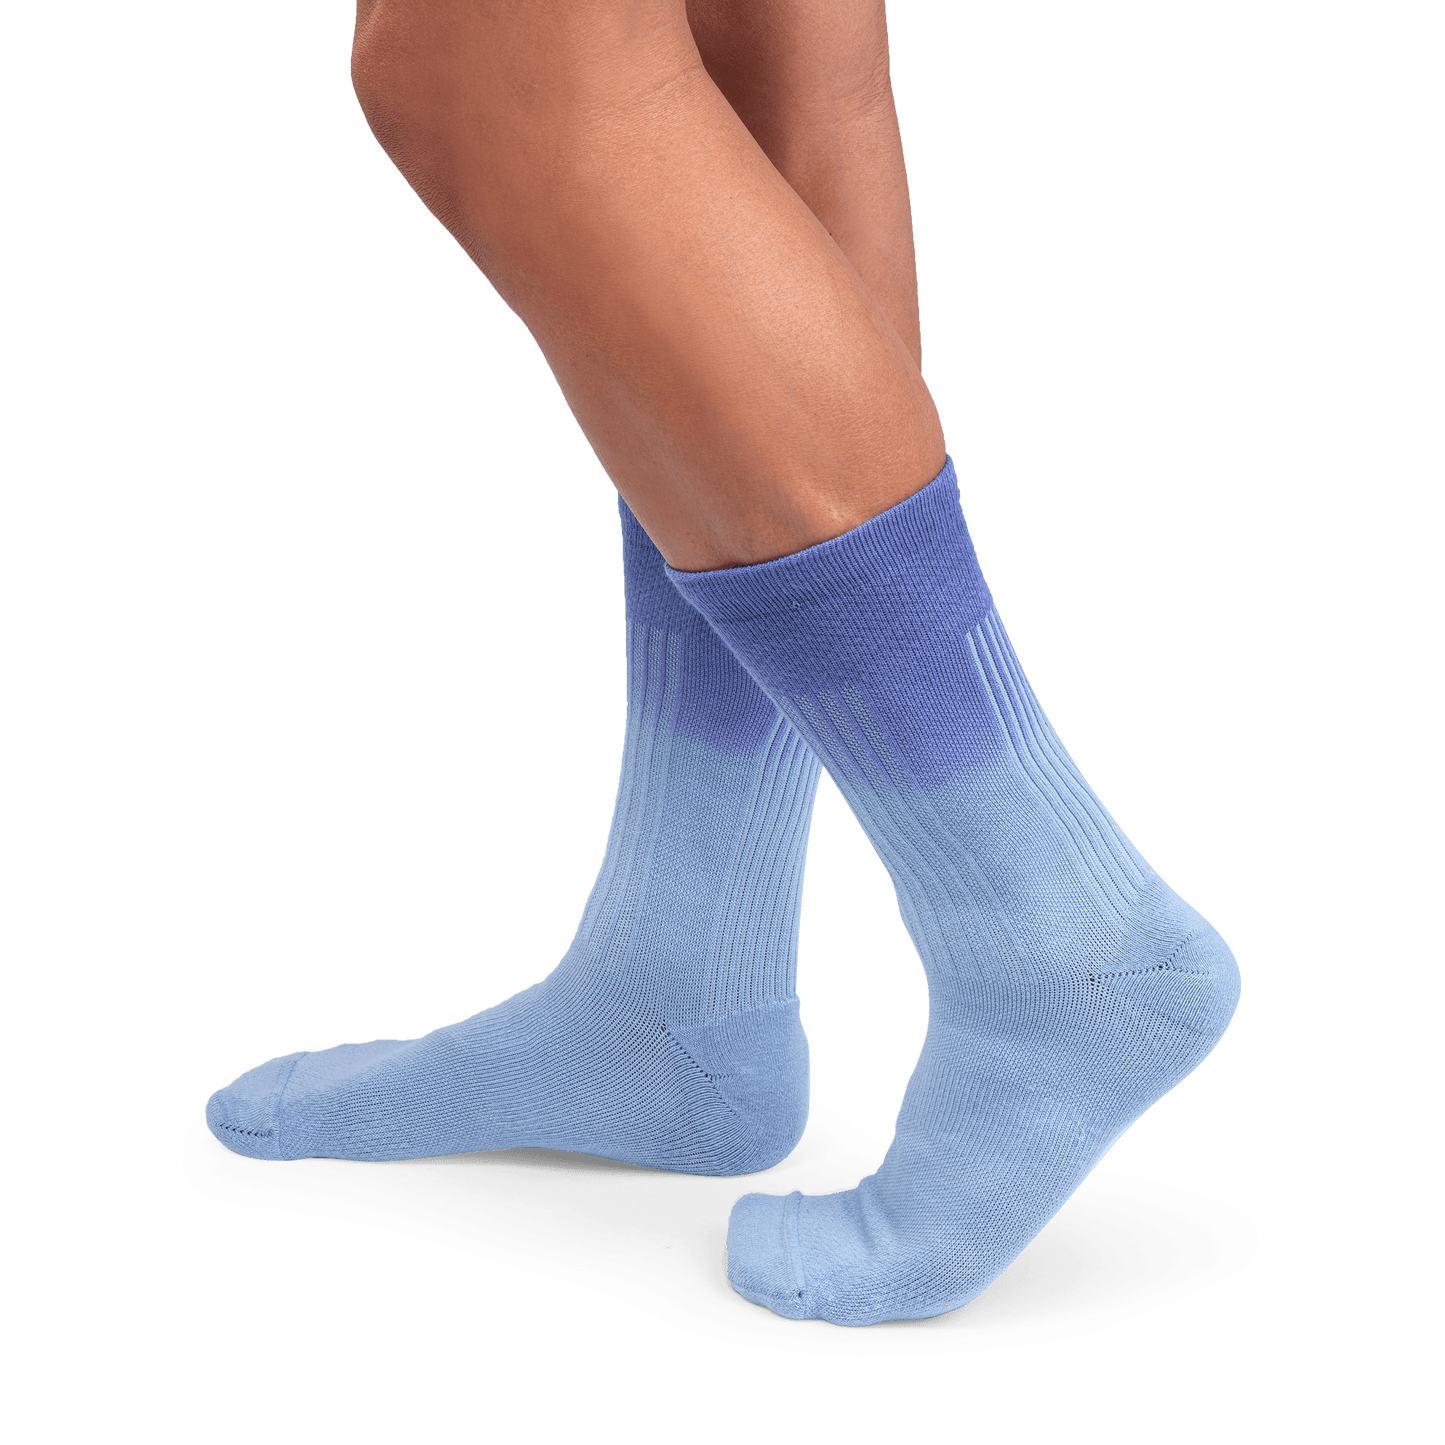 On Men's Everyday Socks - Parkway Fitted